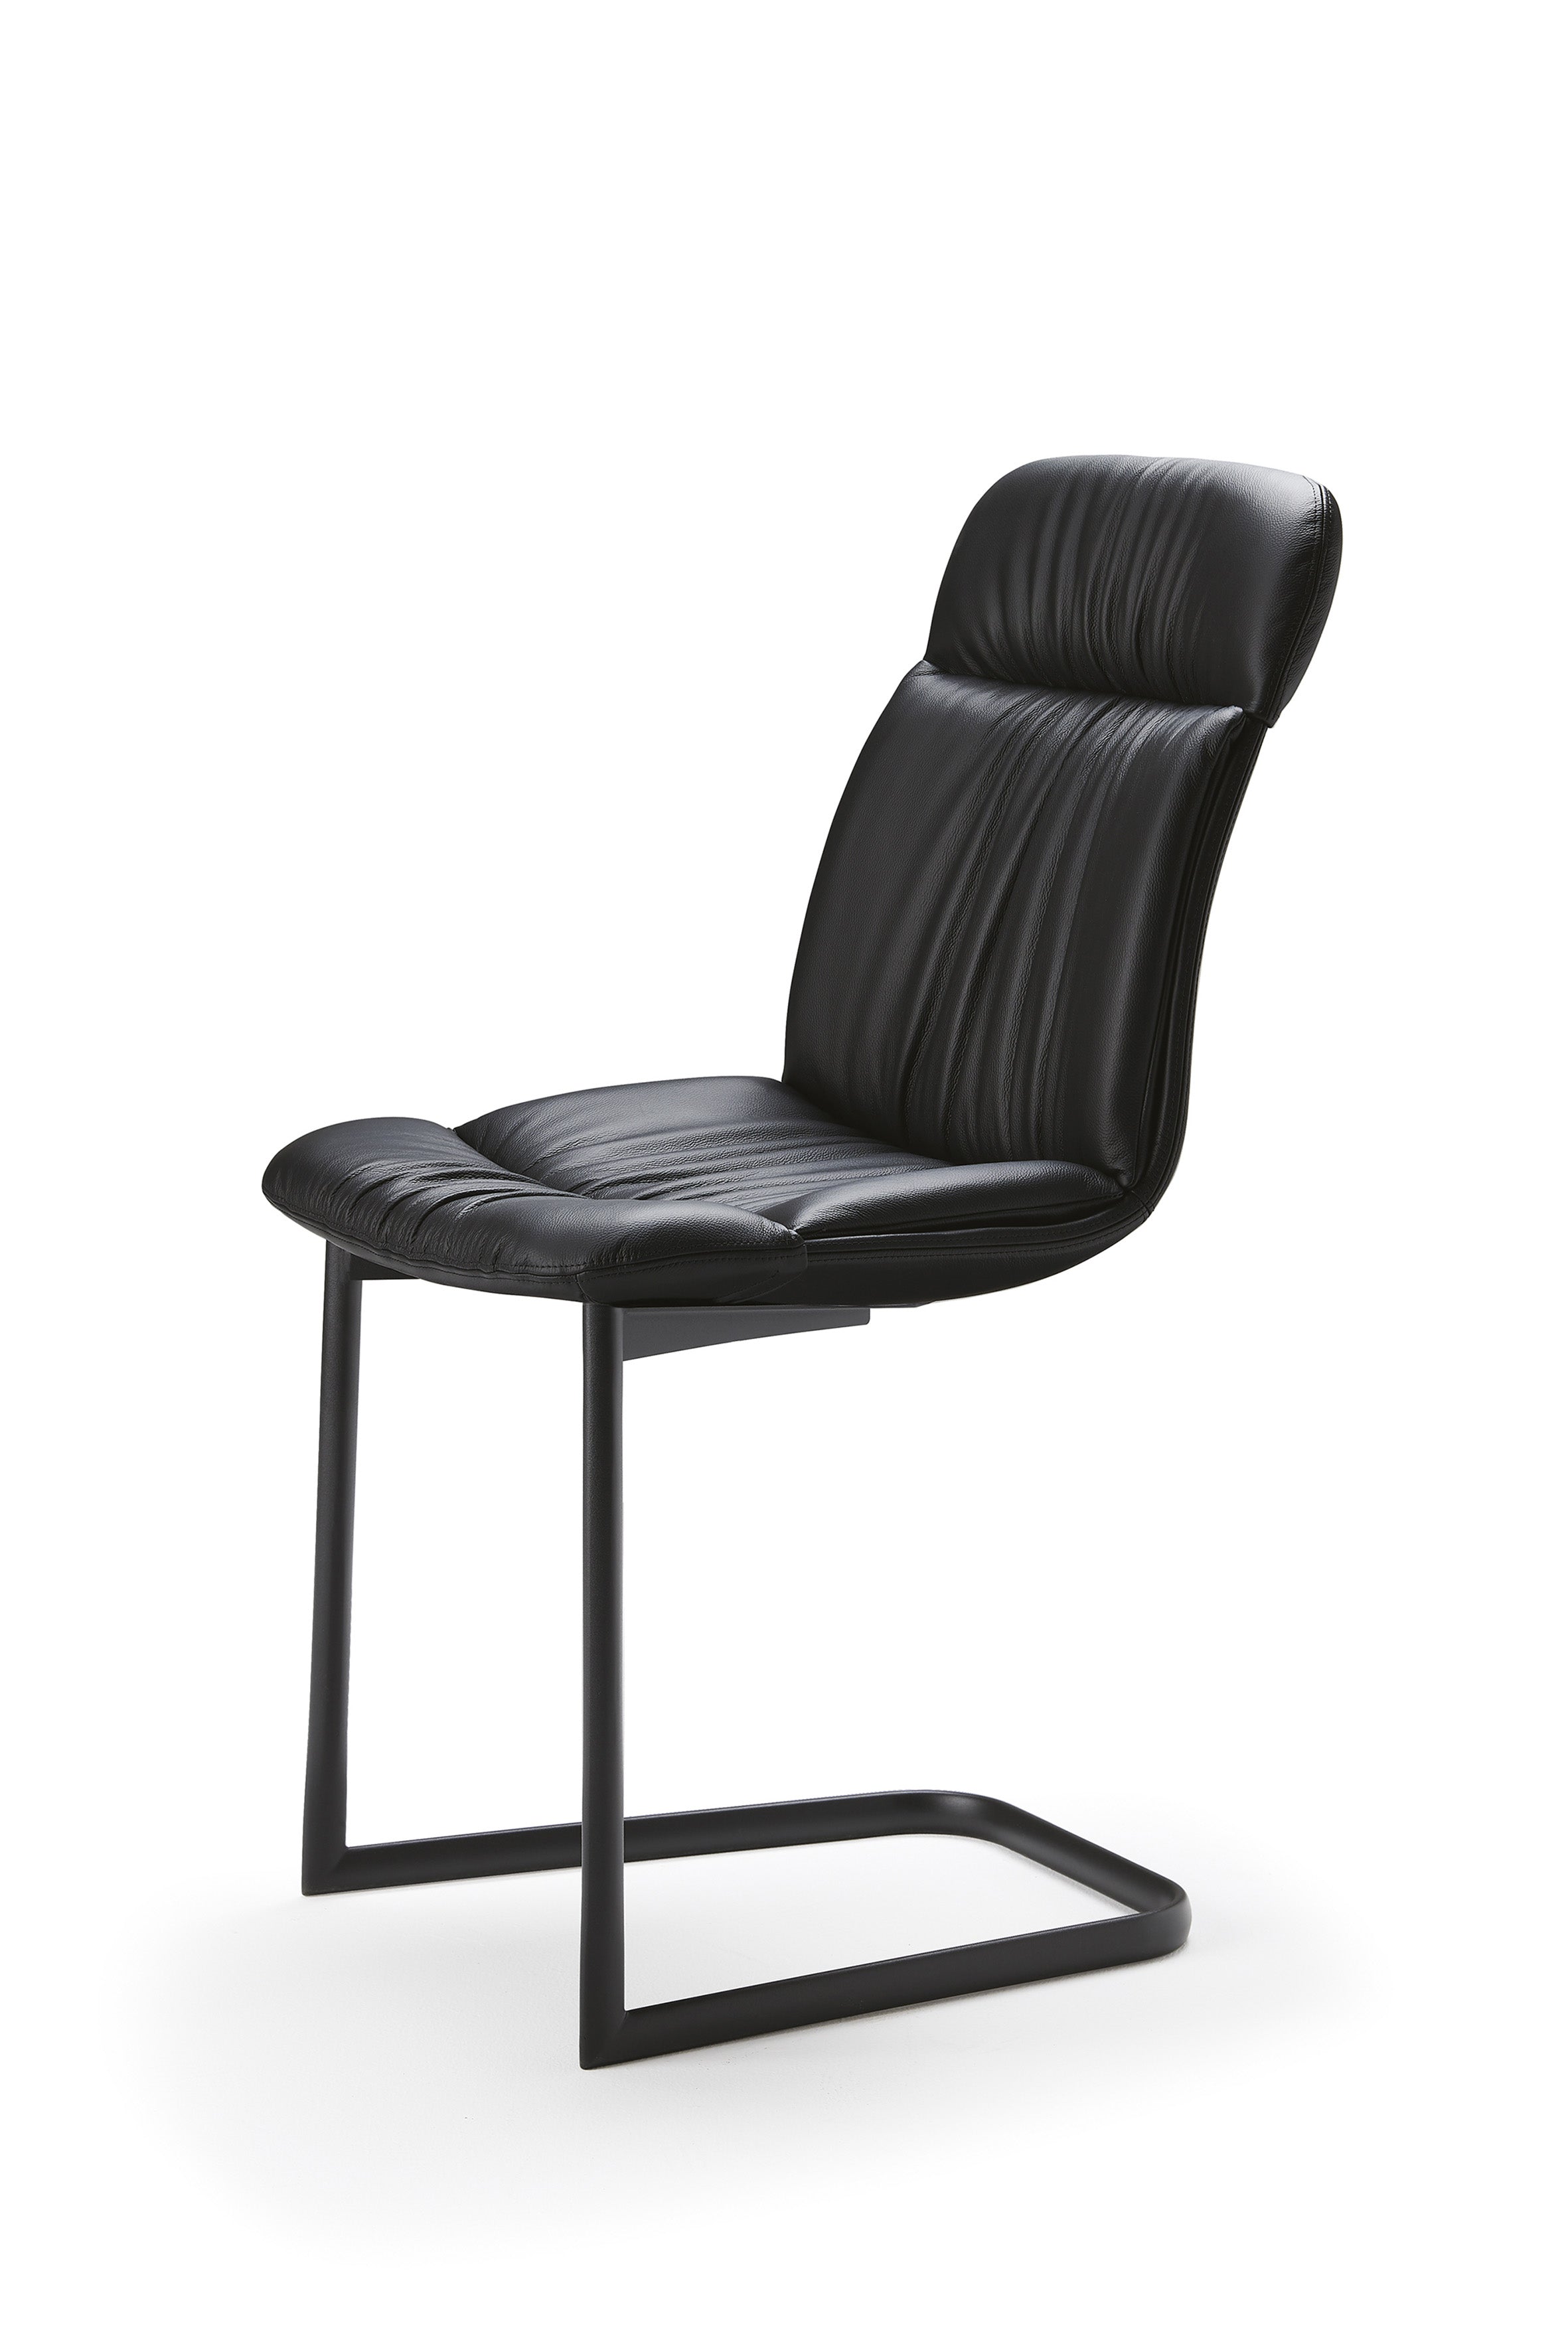 cattelan italia kelly cantilever Chair with cantilever frame